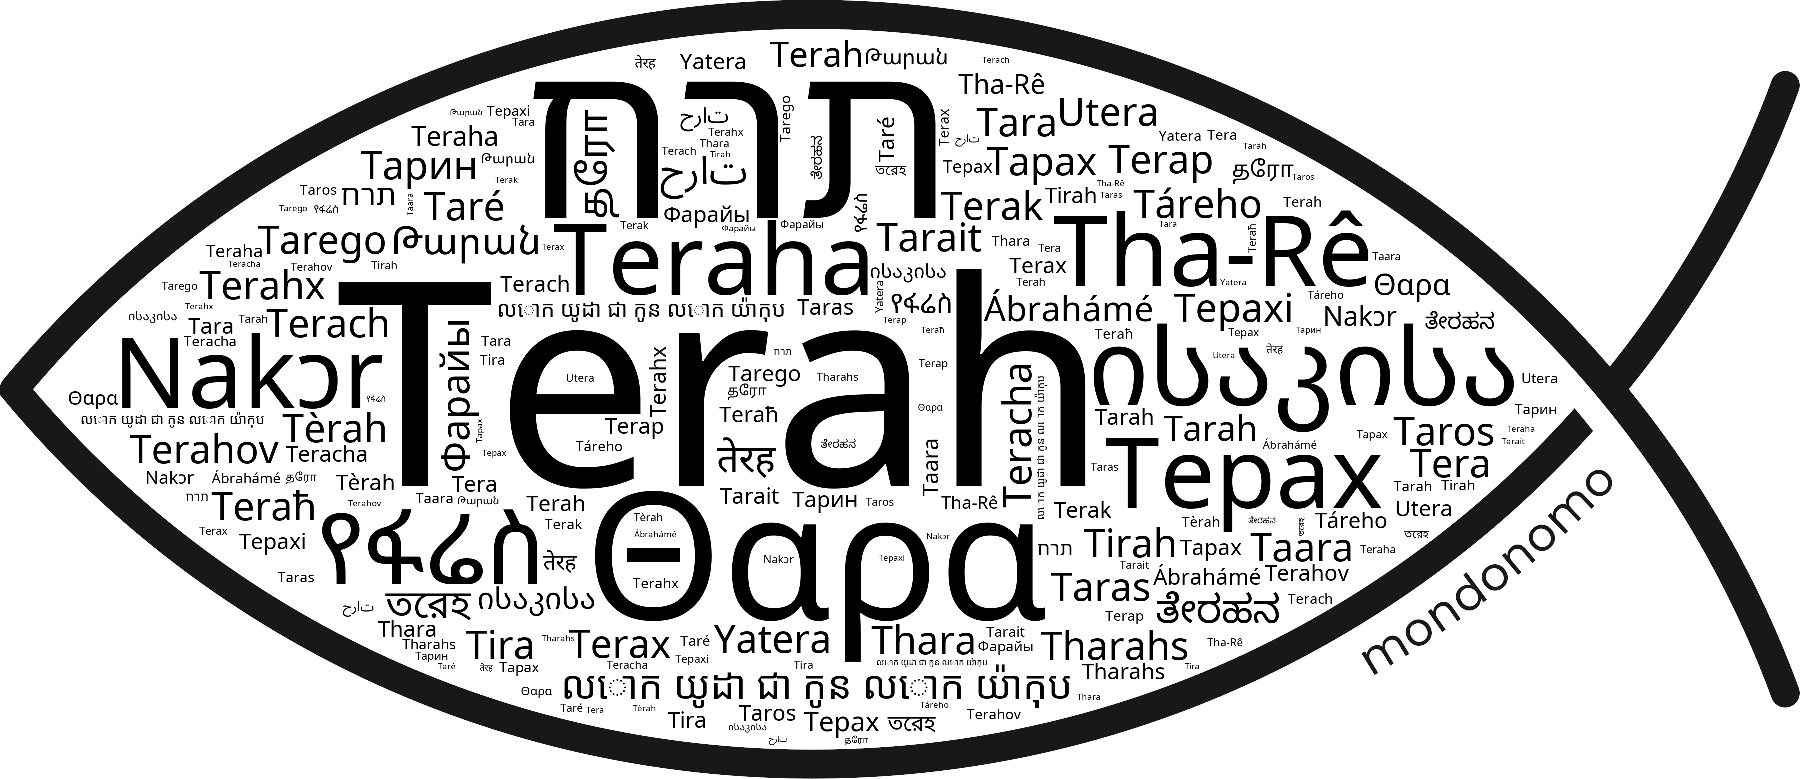 Name Terah in the world's Bibles